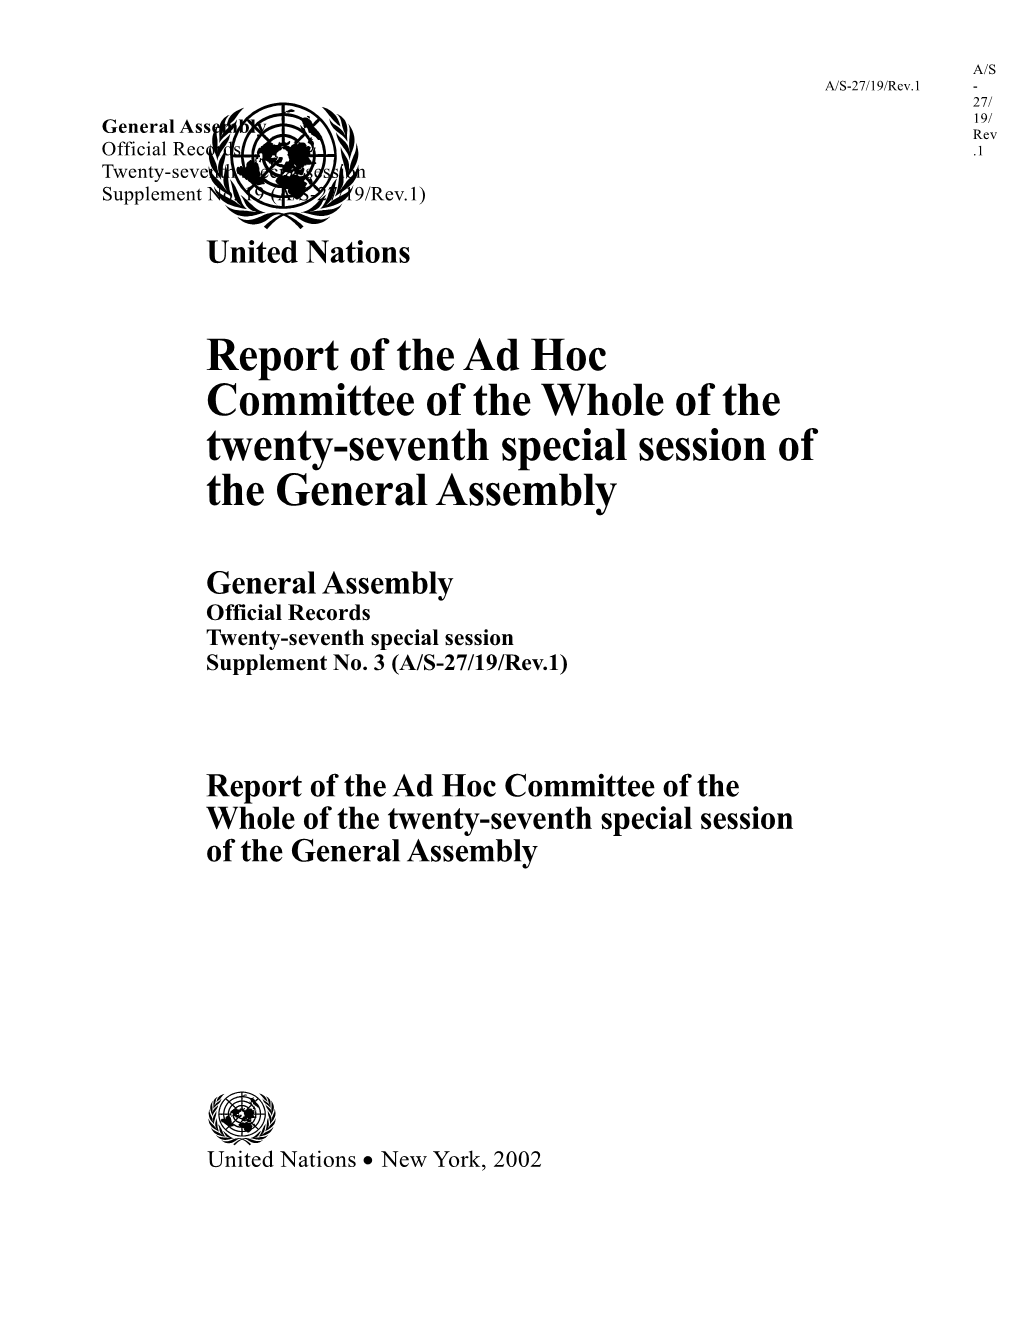 Report of the Ad Hoc Committee of the Whole of the Twenty-Seventh Special Session of The